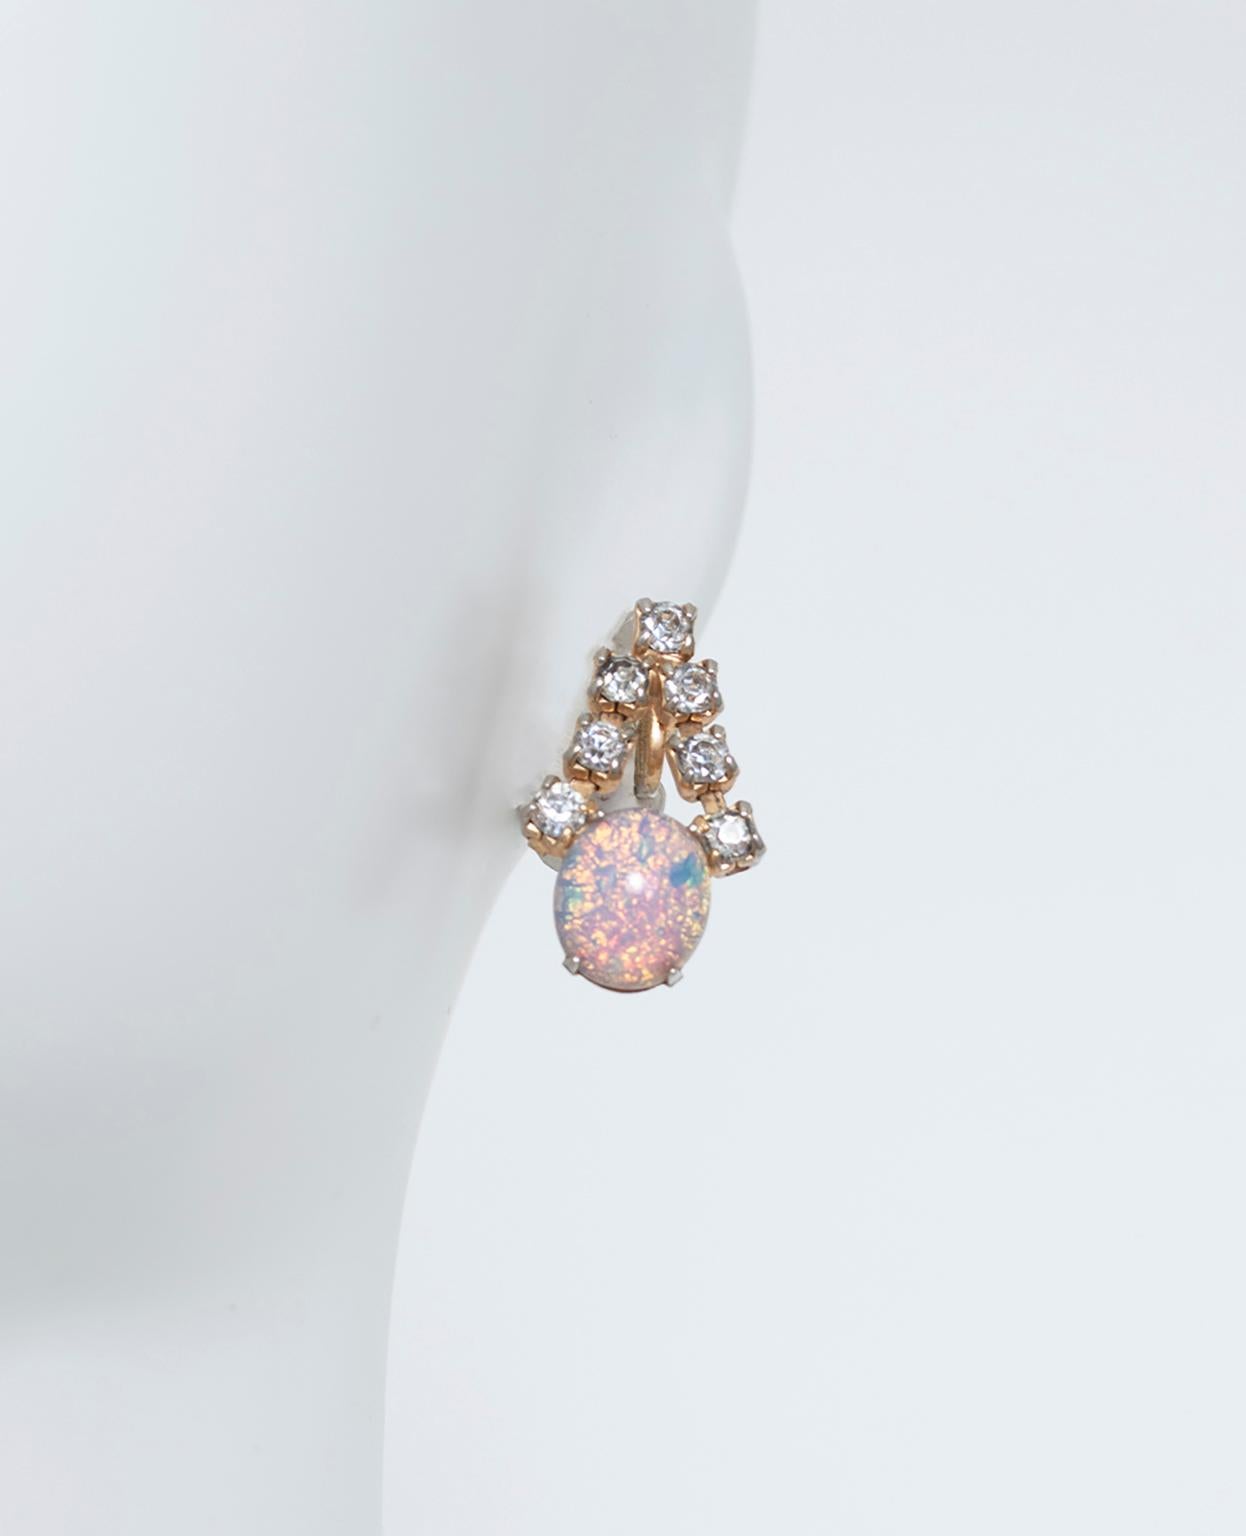 Neither buttons or dangles, these luminous earrings feature an inverted “V” of rhinestones punctuated by a perfect 12 mm opal cabochon. Petite yet statement-making and thoroughly mesmerizing.

Earrings featuring seven 4 mm rhinestones arranged in an